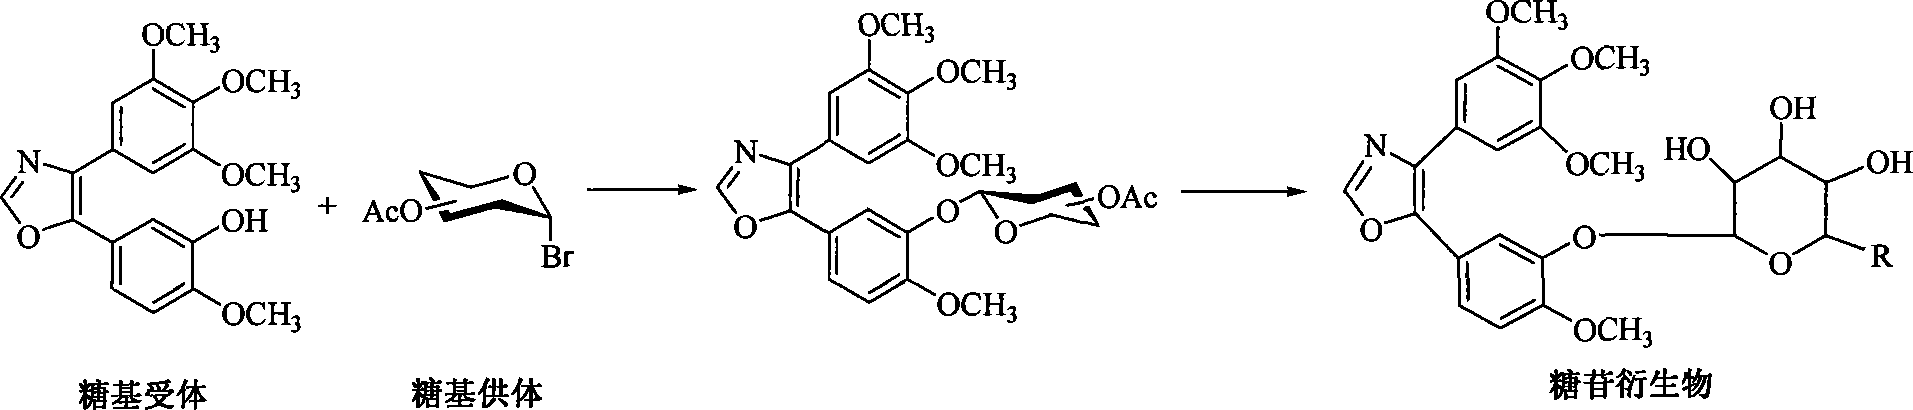 1,2-glycoside transderivative of oxazole compounds and preparation method thereof